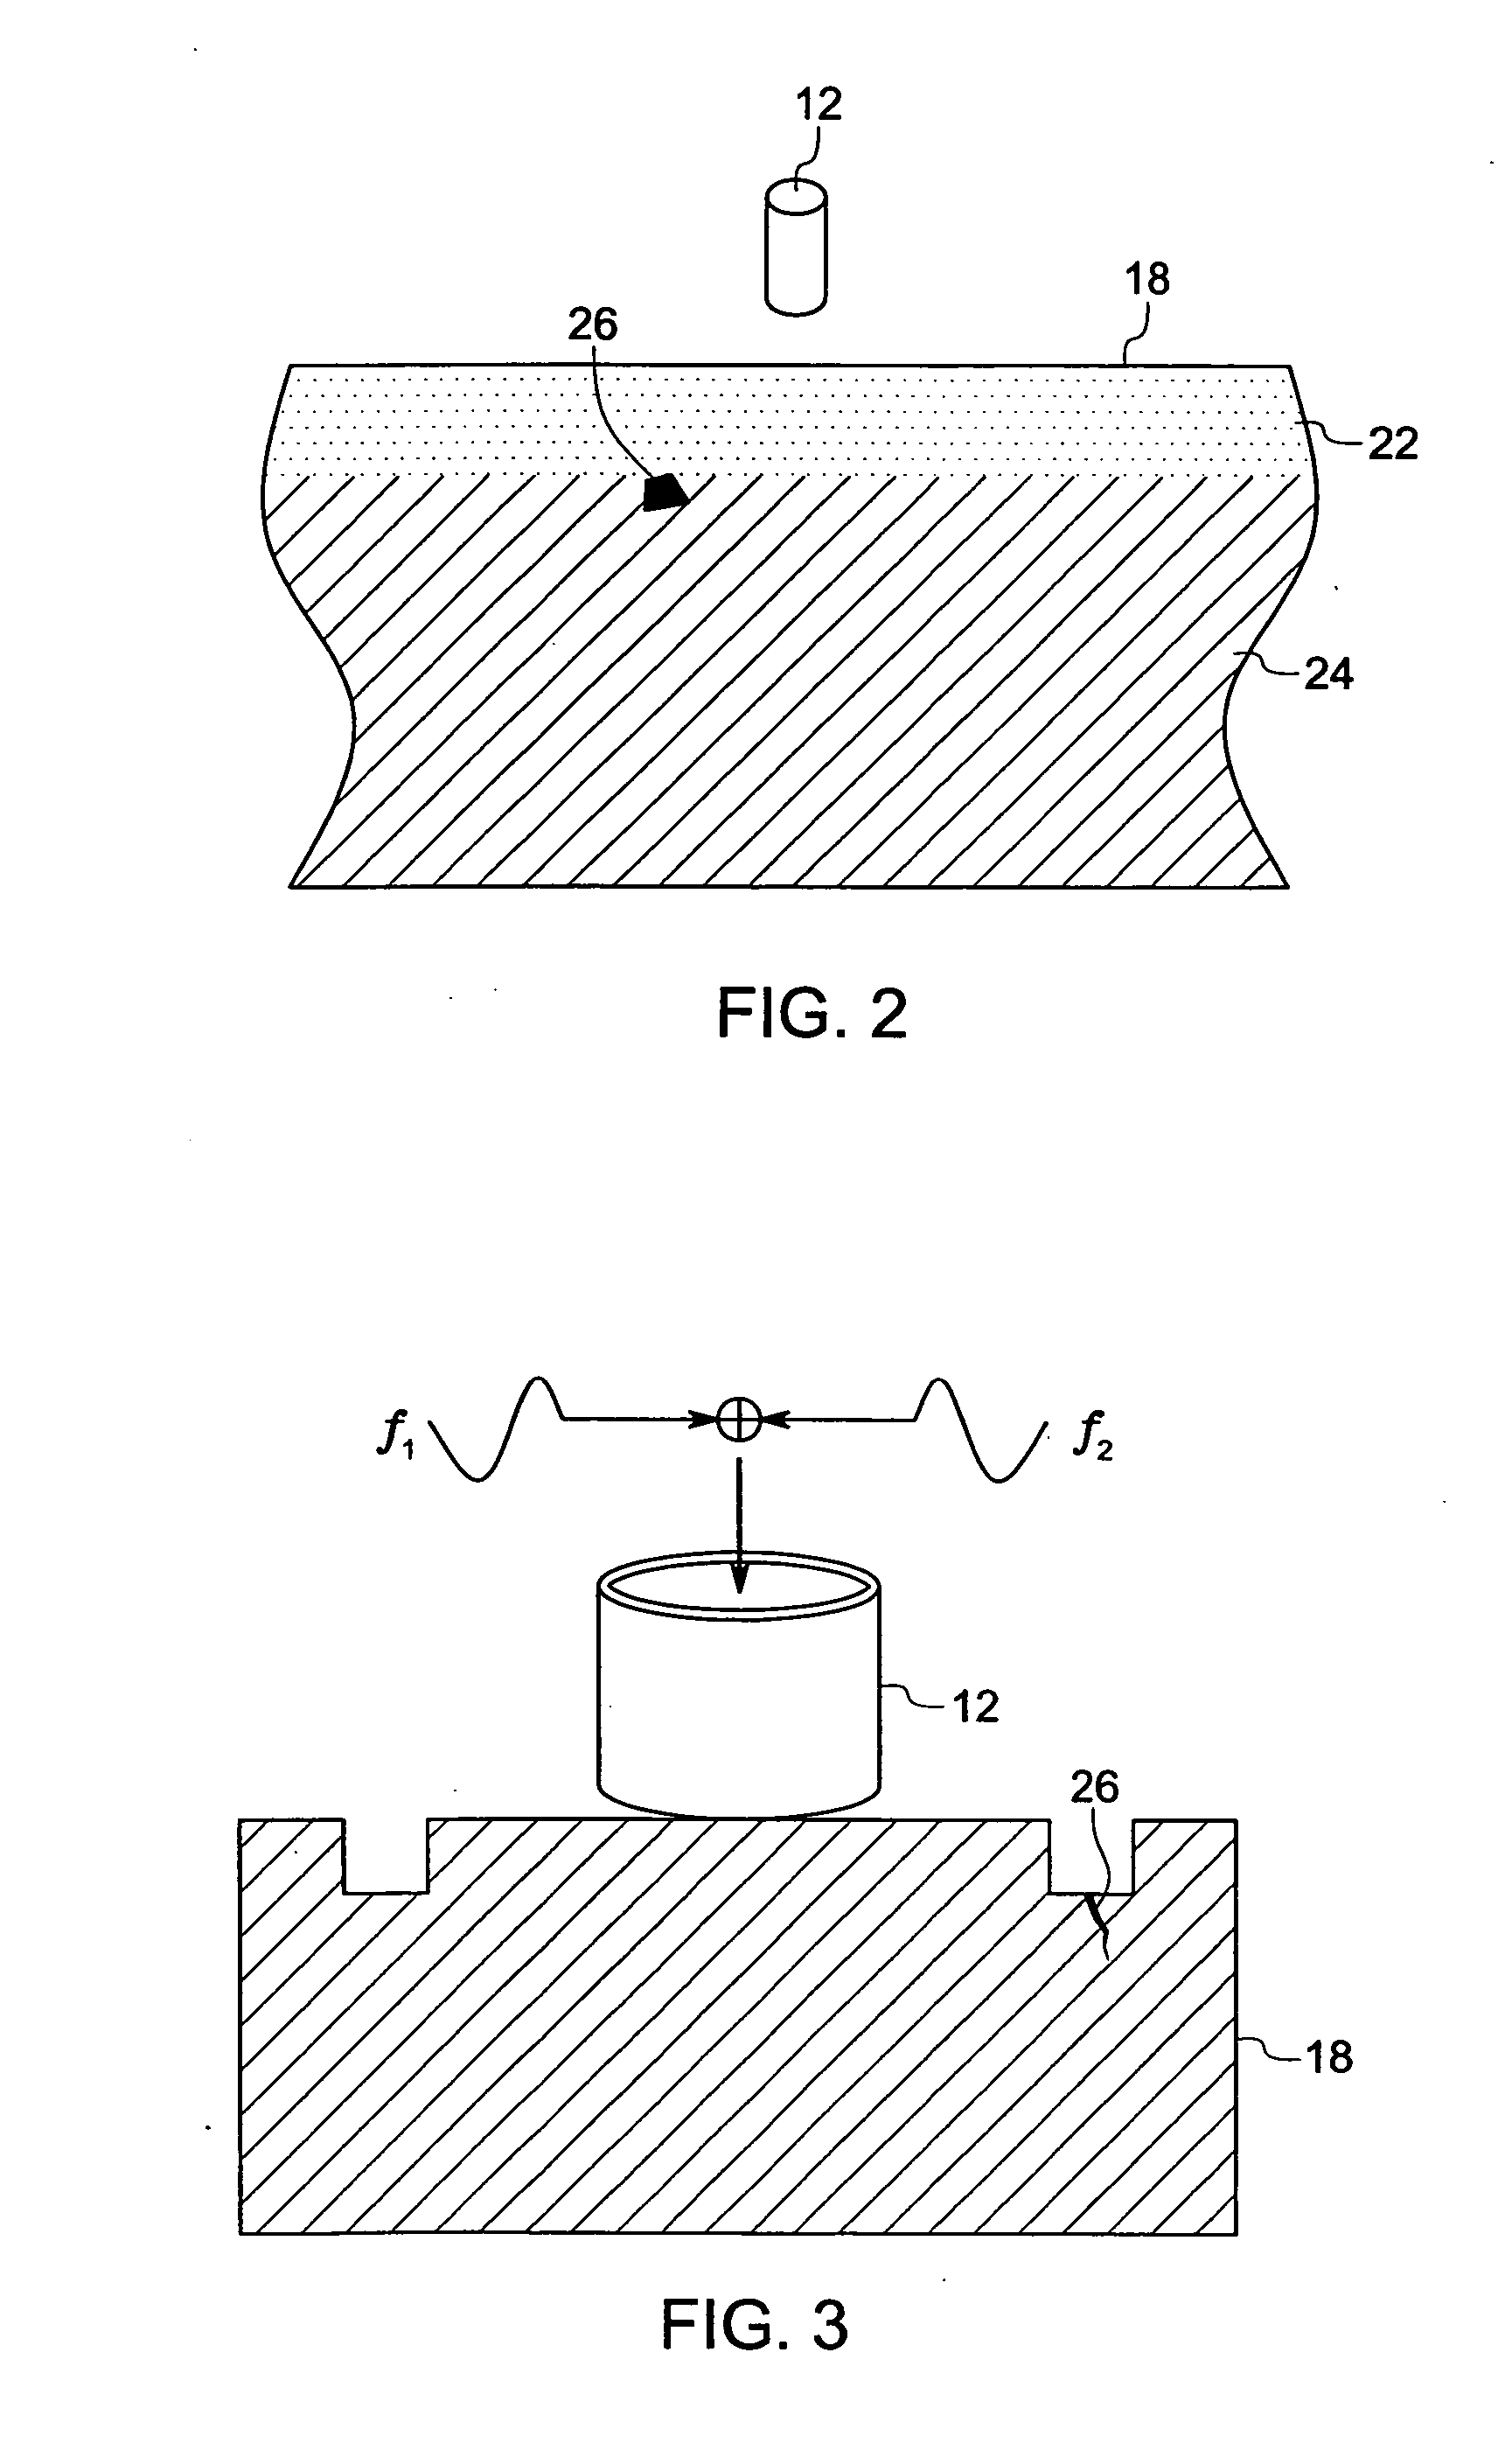 Inspection method and system using multifrequency phase analysis